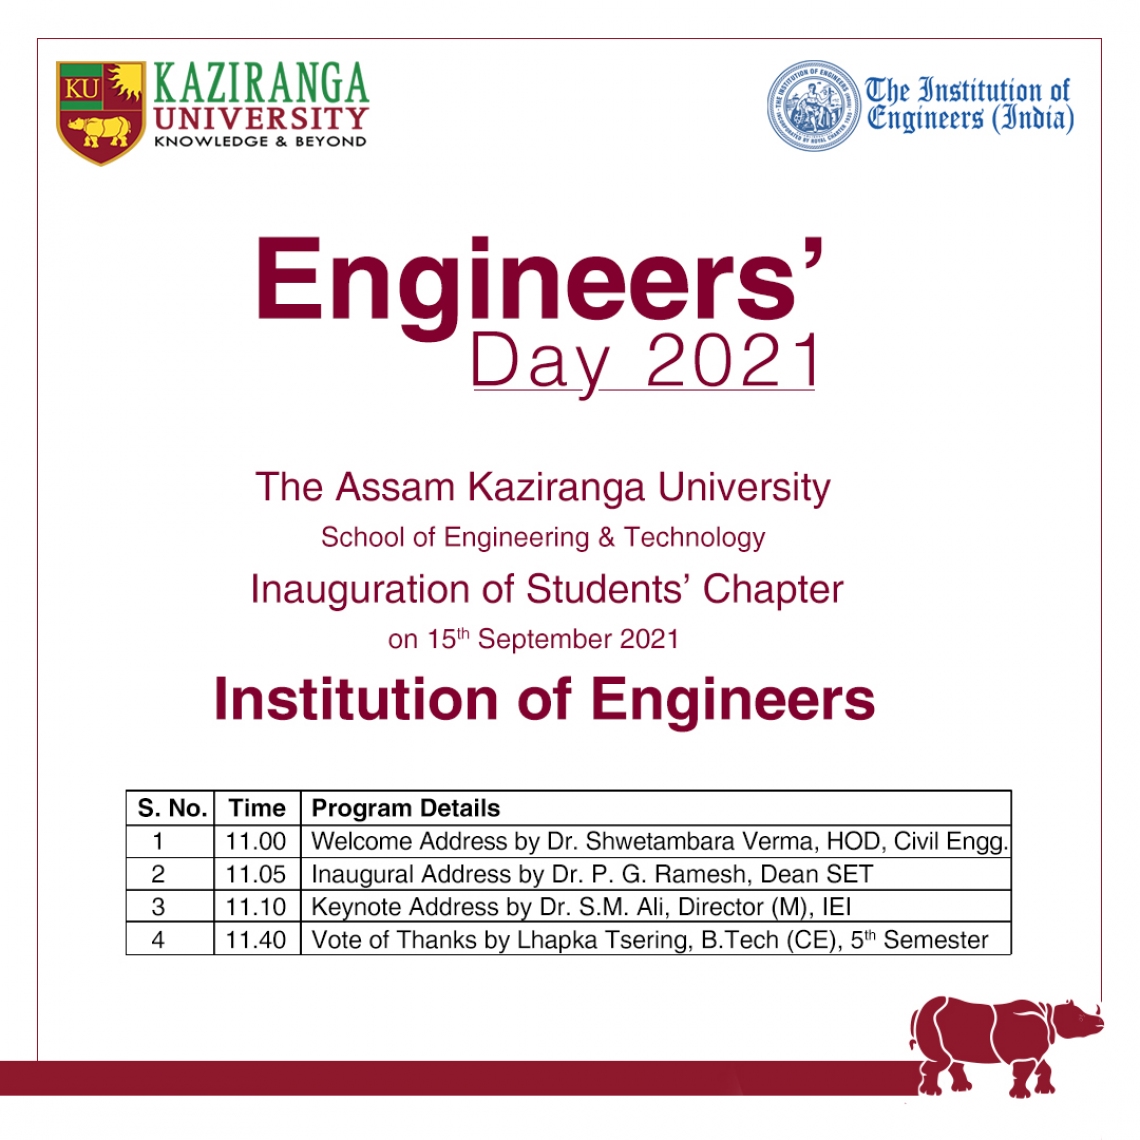 KU SET Inaugurated the first-ever Student's Chapter of Institution of Engineers, India